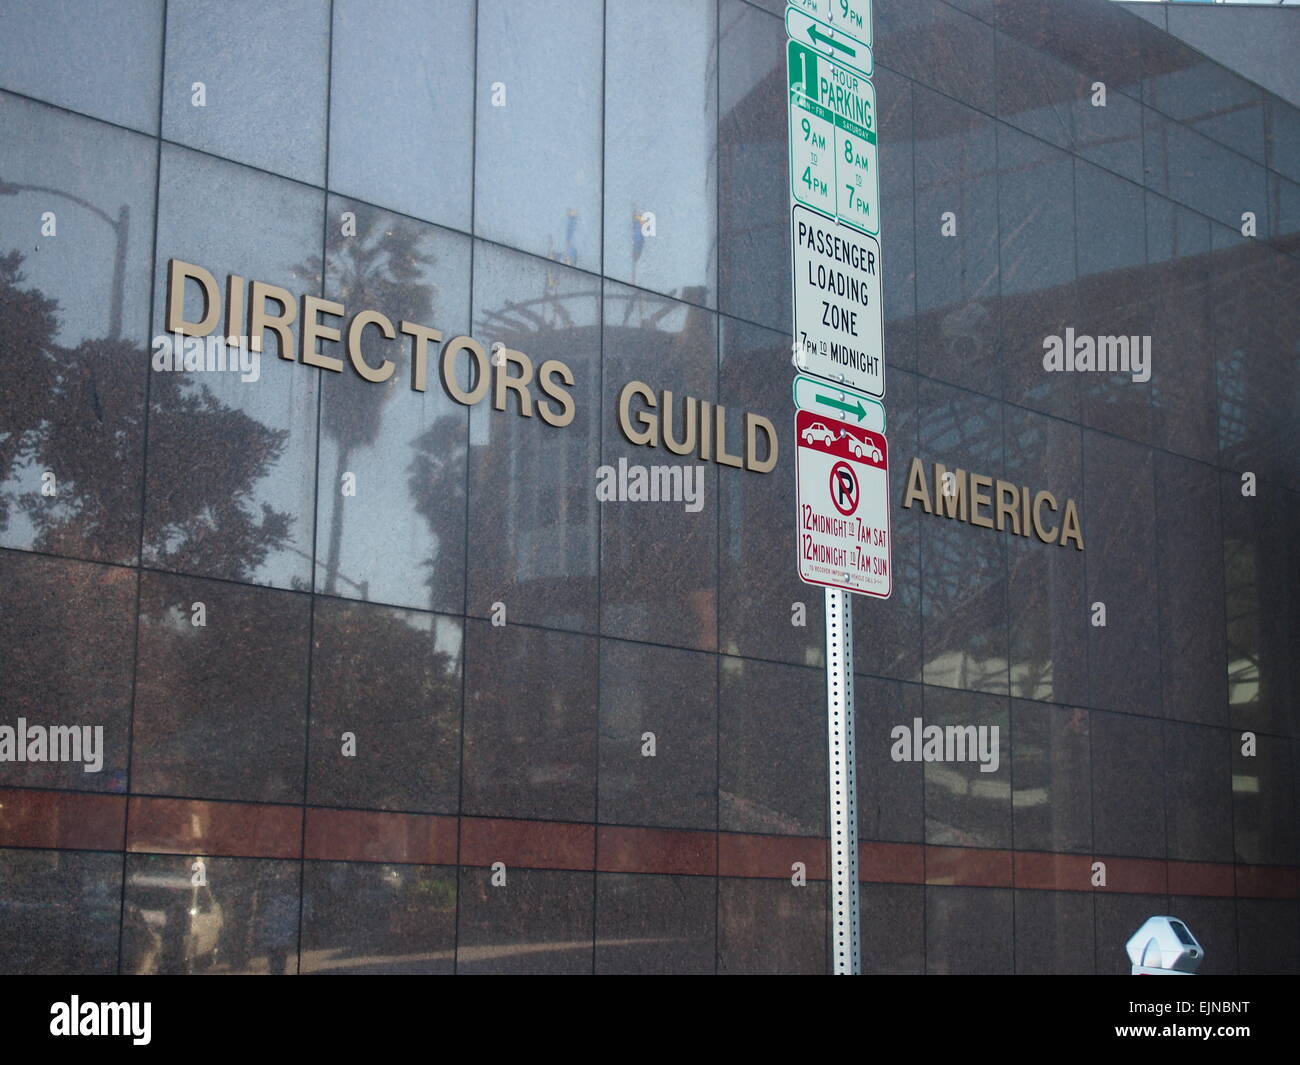 Directors Guild of America, Hollywood, Los Angeles, USA Banque D'Images